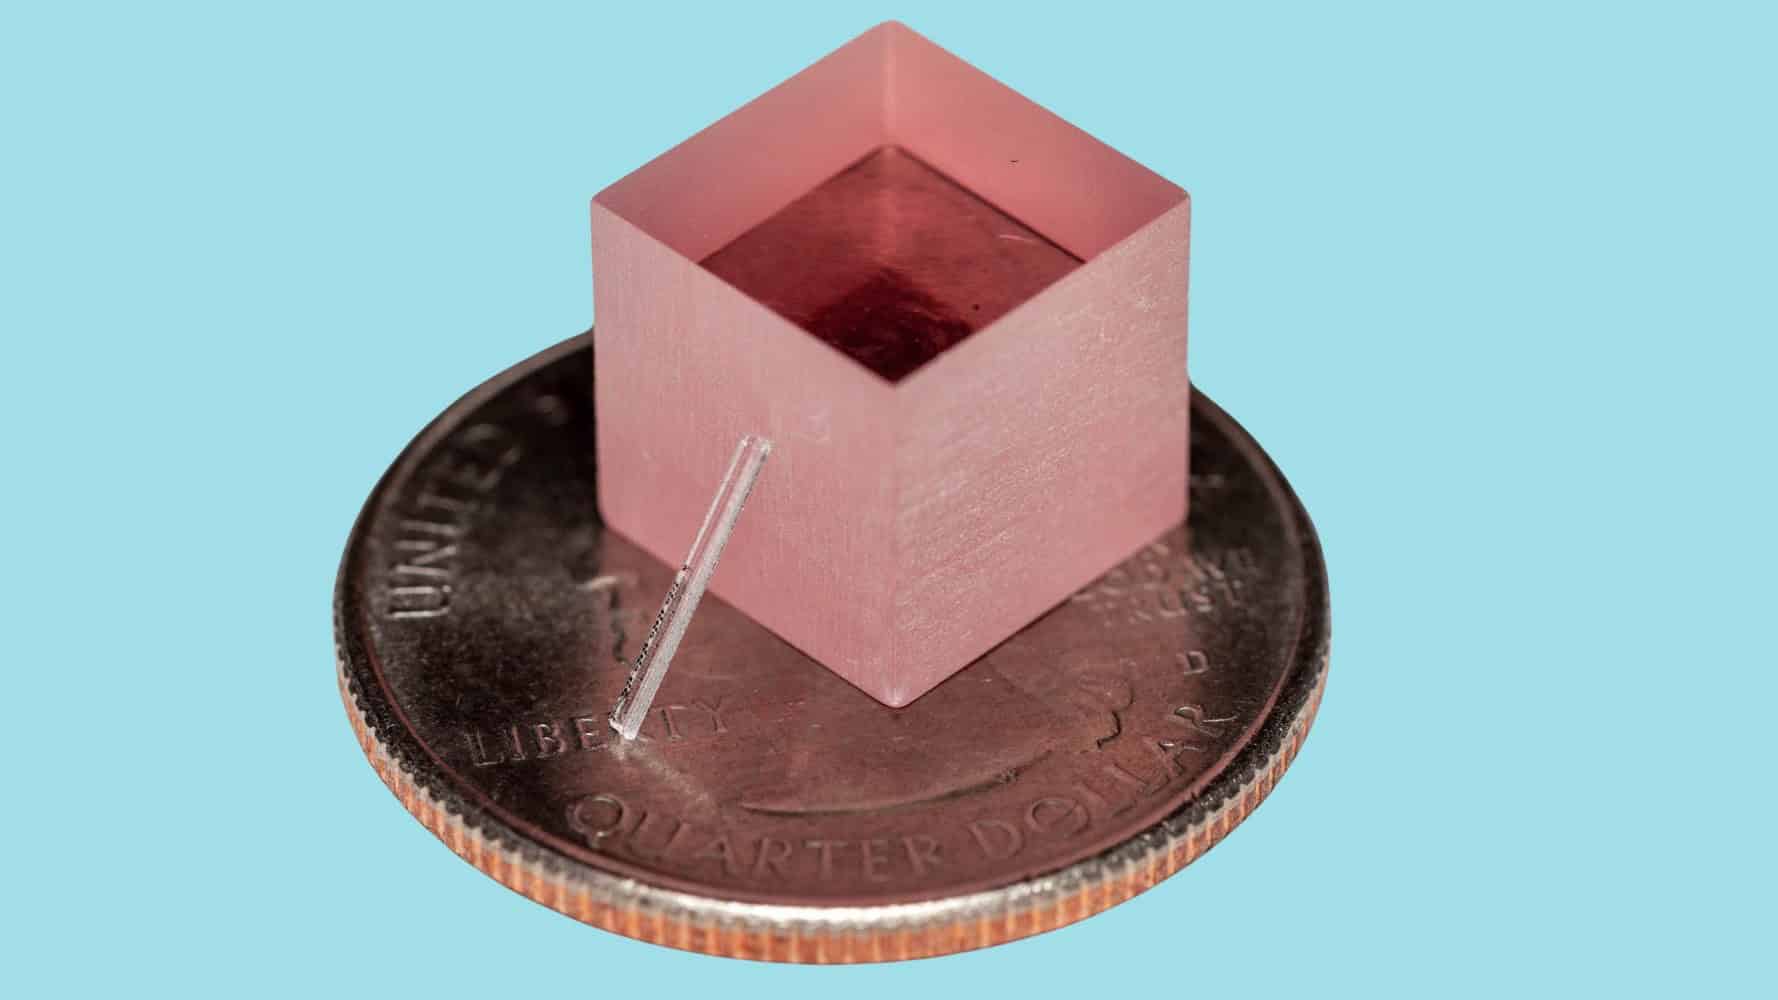 Physics World: Revolutionary Small and Affordable Titanium:Sapphire Laser Offers Tunability